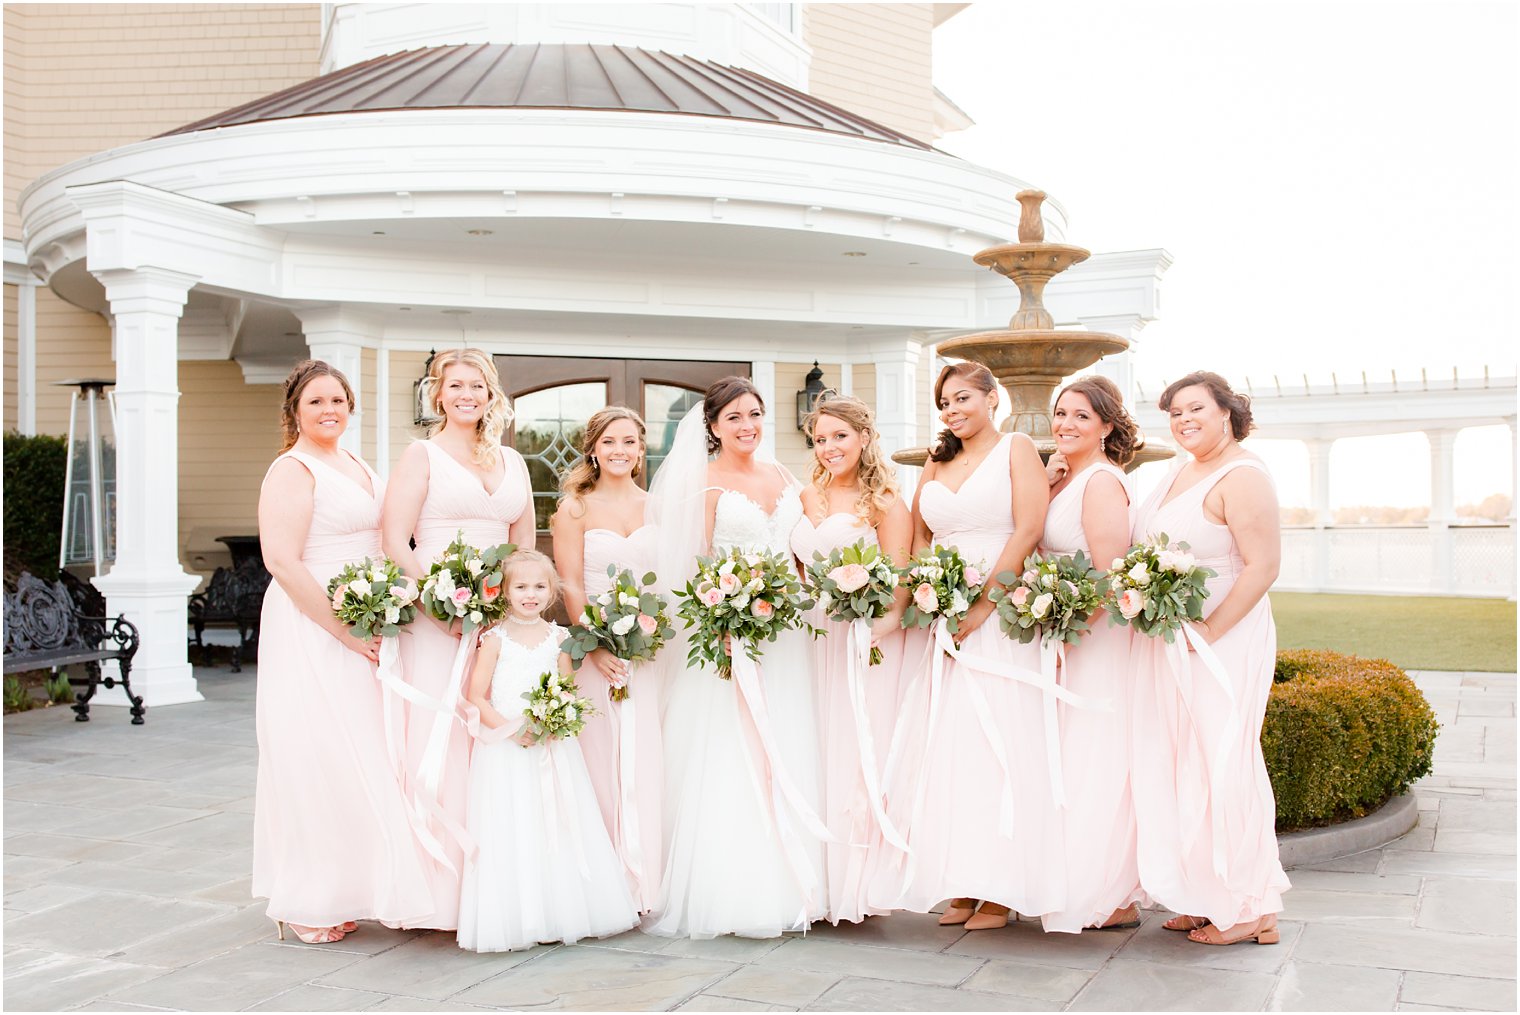 Bridesmaids and flower girl at Clarks Landing Yacht Club Wedding